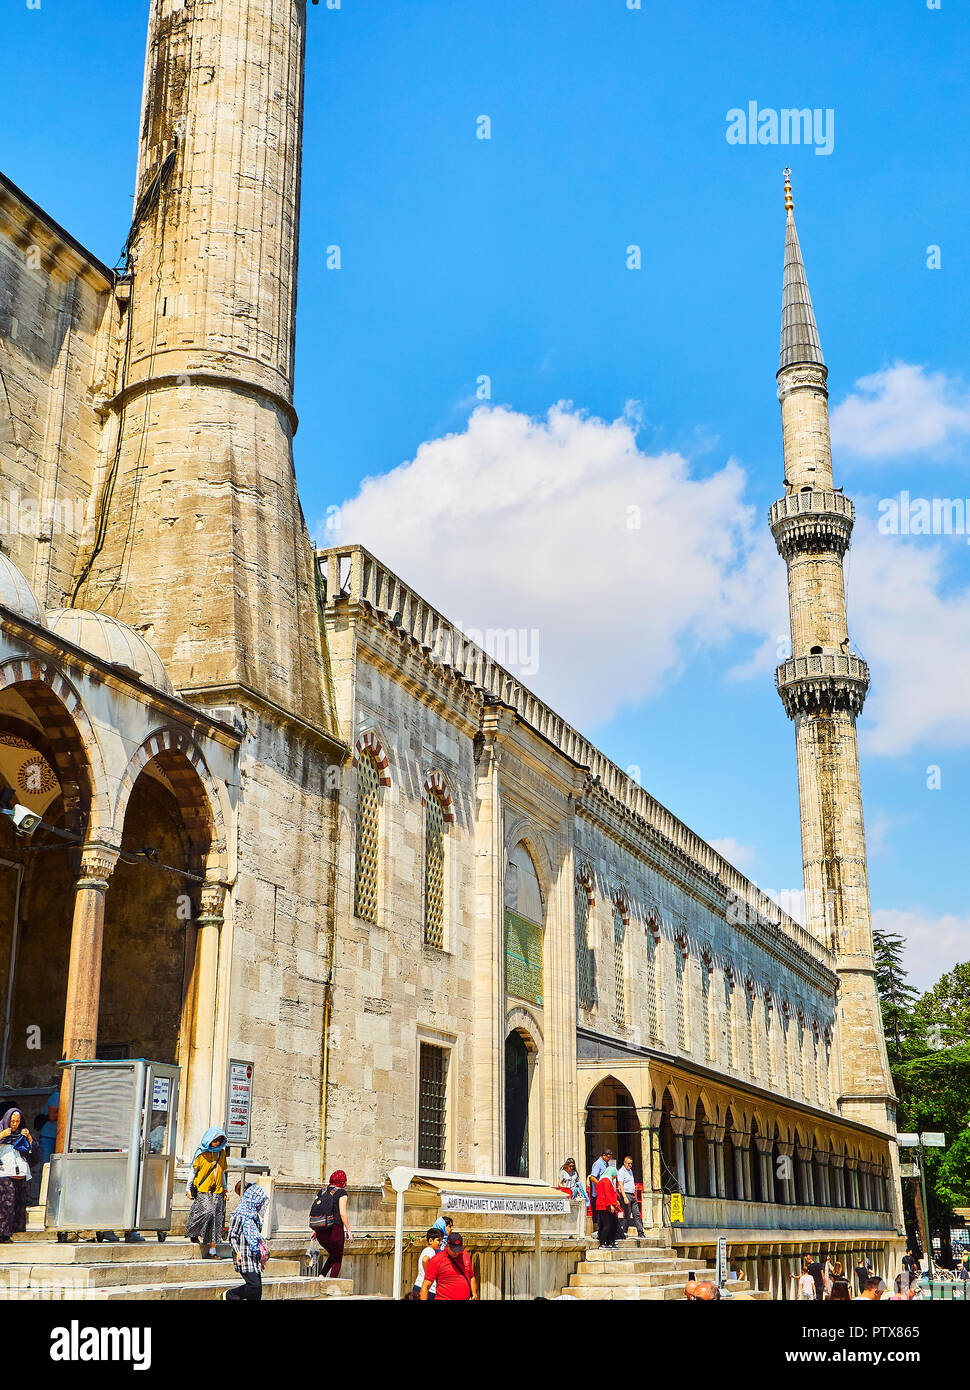 Istanbul, Turkey - July 7, 2018. Tourists at the north-eastern entry to The Sultan Ahmet Camii Mosque, also known as The Blue Mosque. Istanbul, Turkey Stock Photo